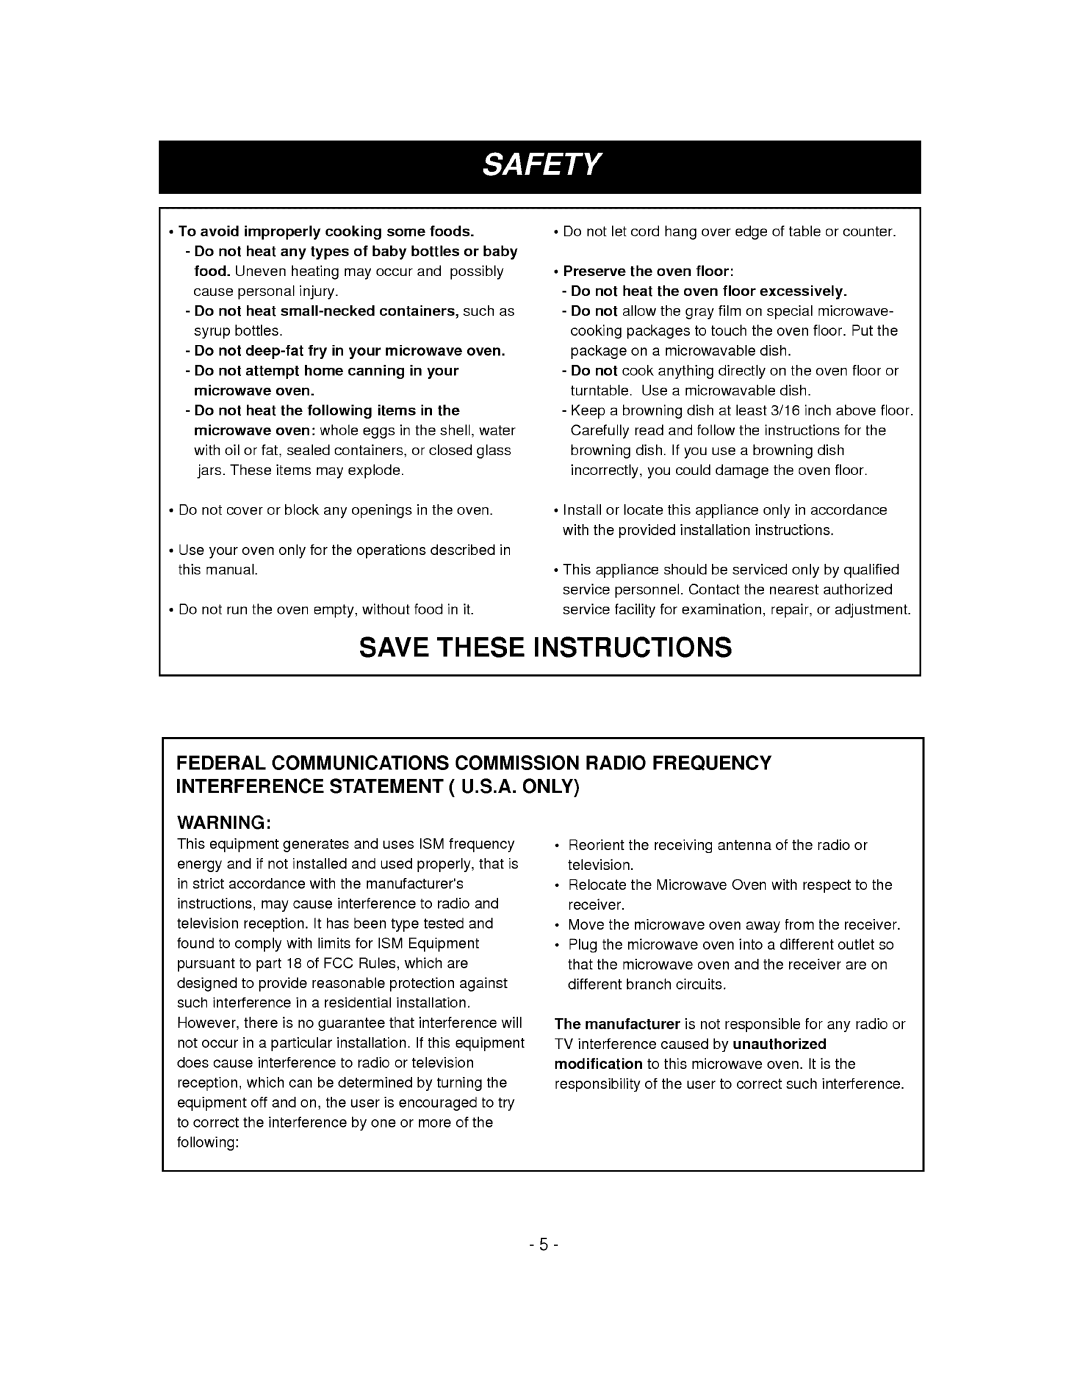 LG Electronics MV-1310B, MV-1310W owner manual Save These Instructions, Federal Communications Commission Radio Frequency 